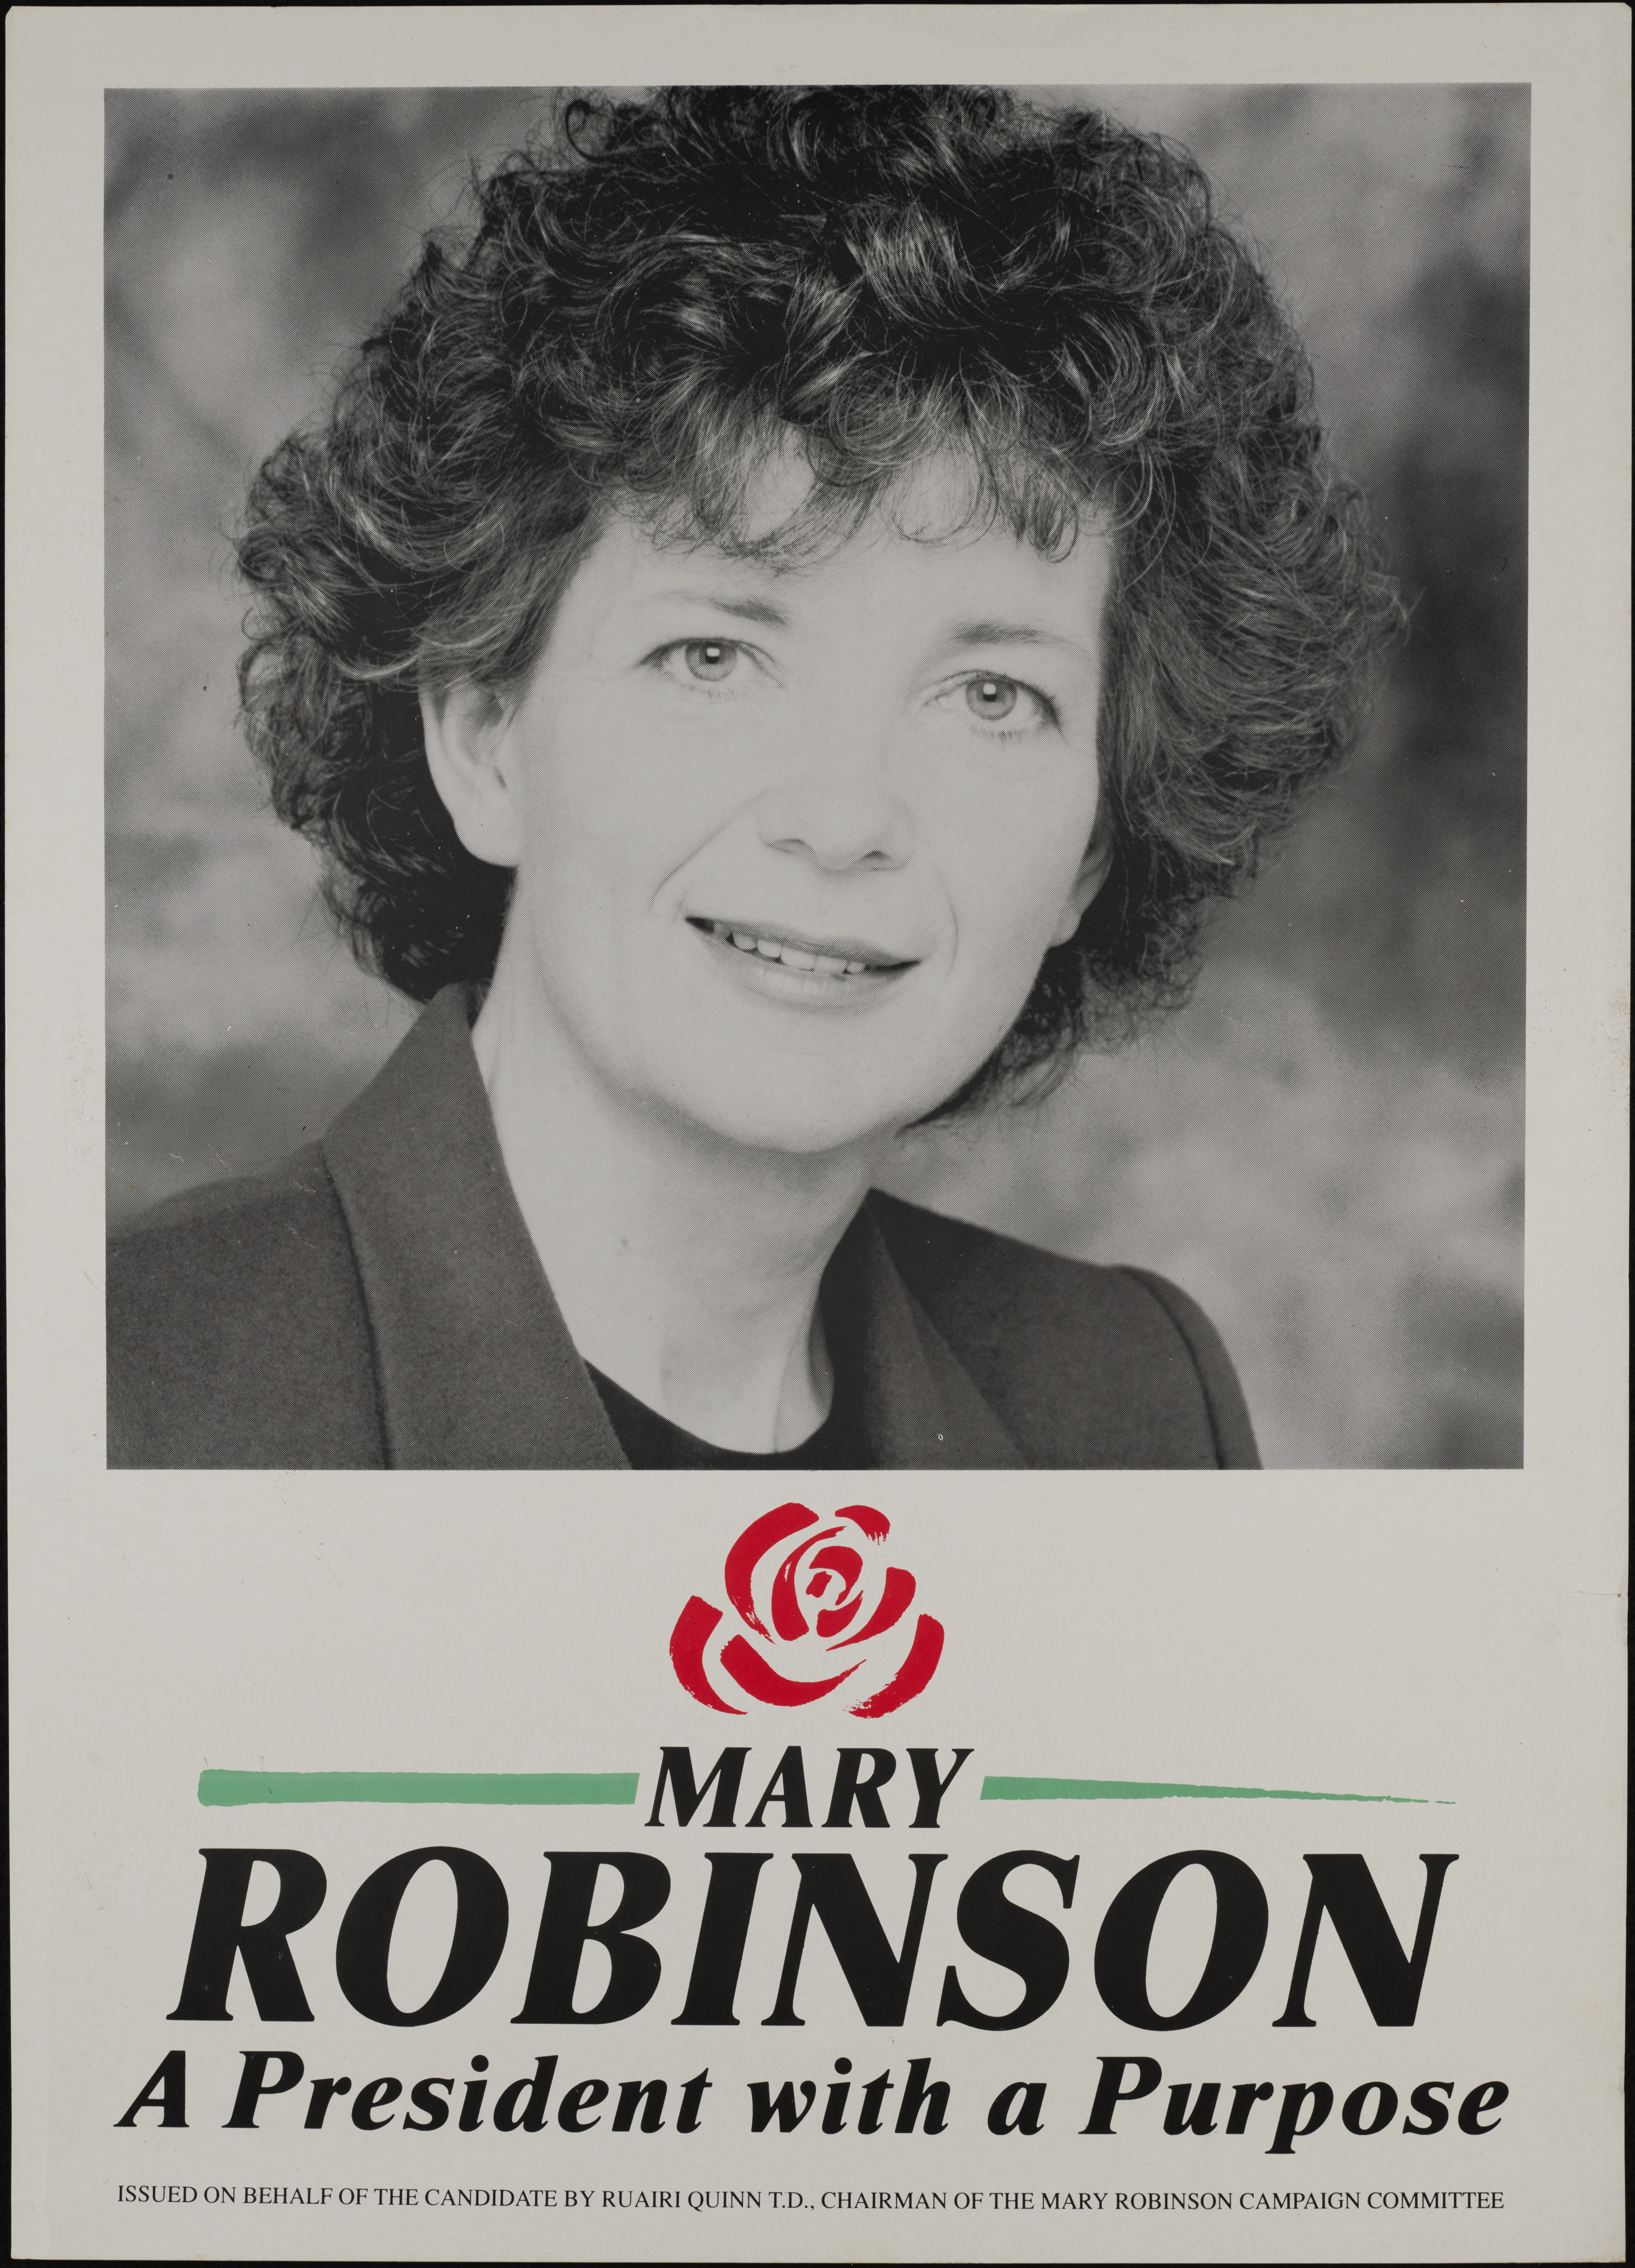 Overview of Mary Robinson’s Archive